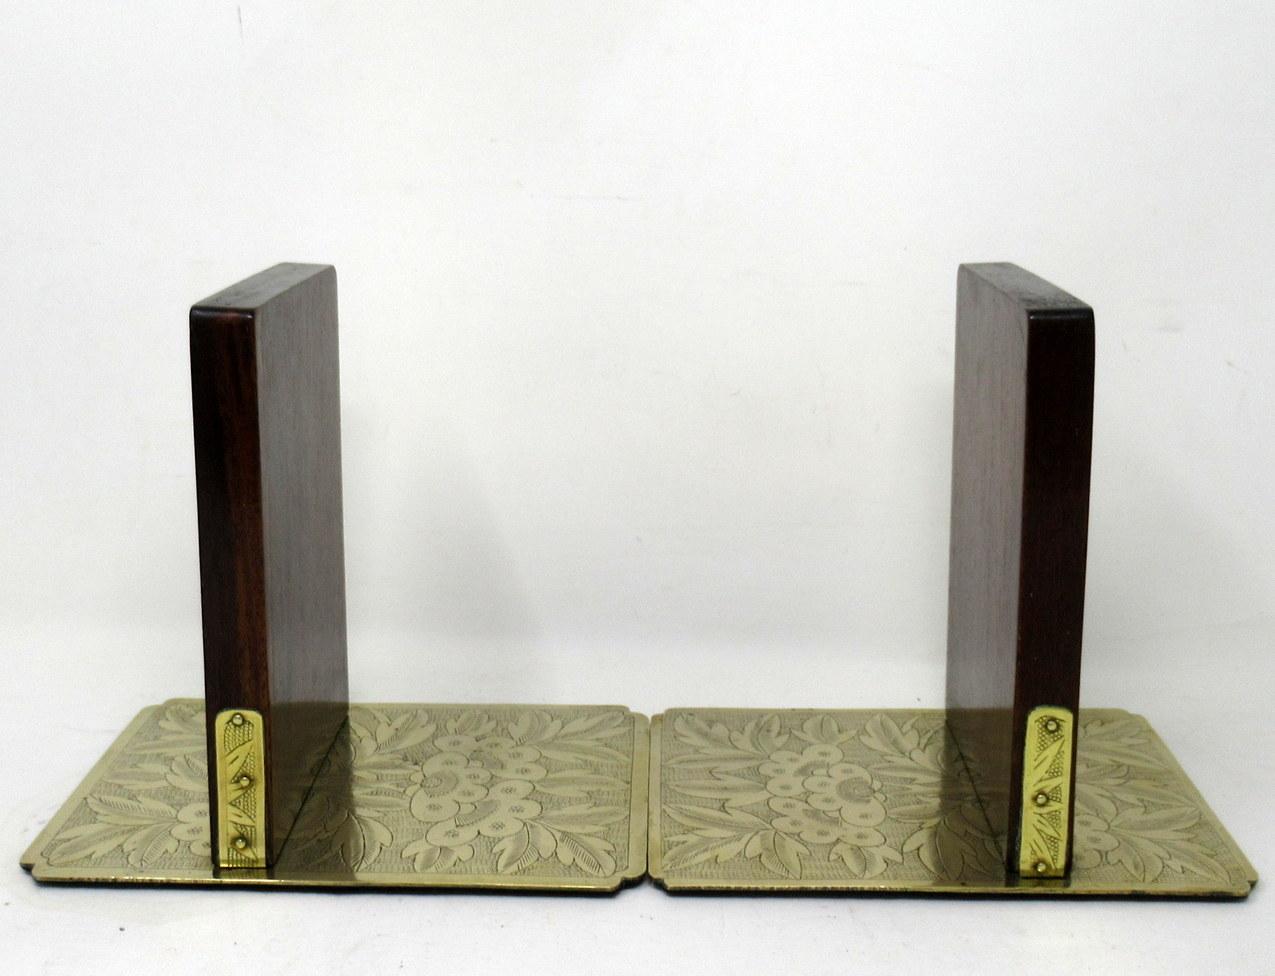 Antique Pair Chinese Hardwood Jade Brass Book Ends Holders Qing Dynasty Period 2